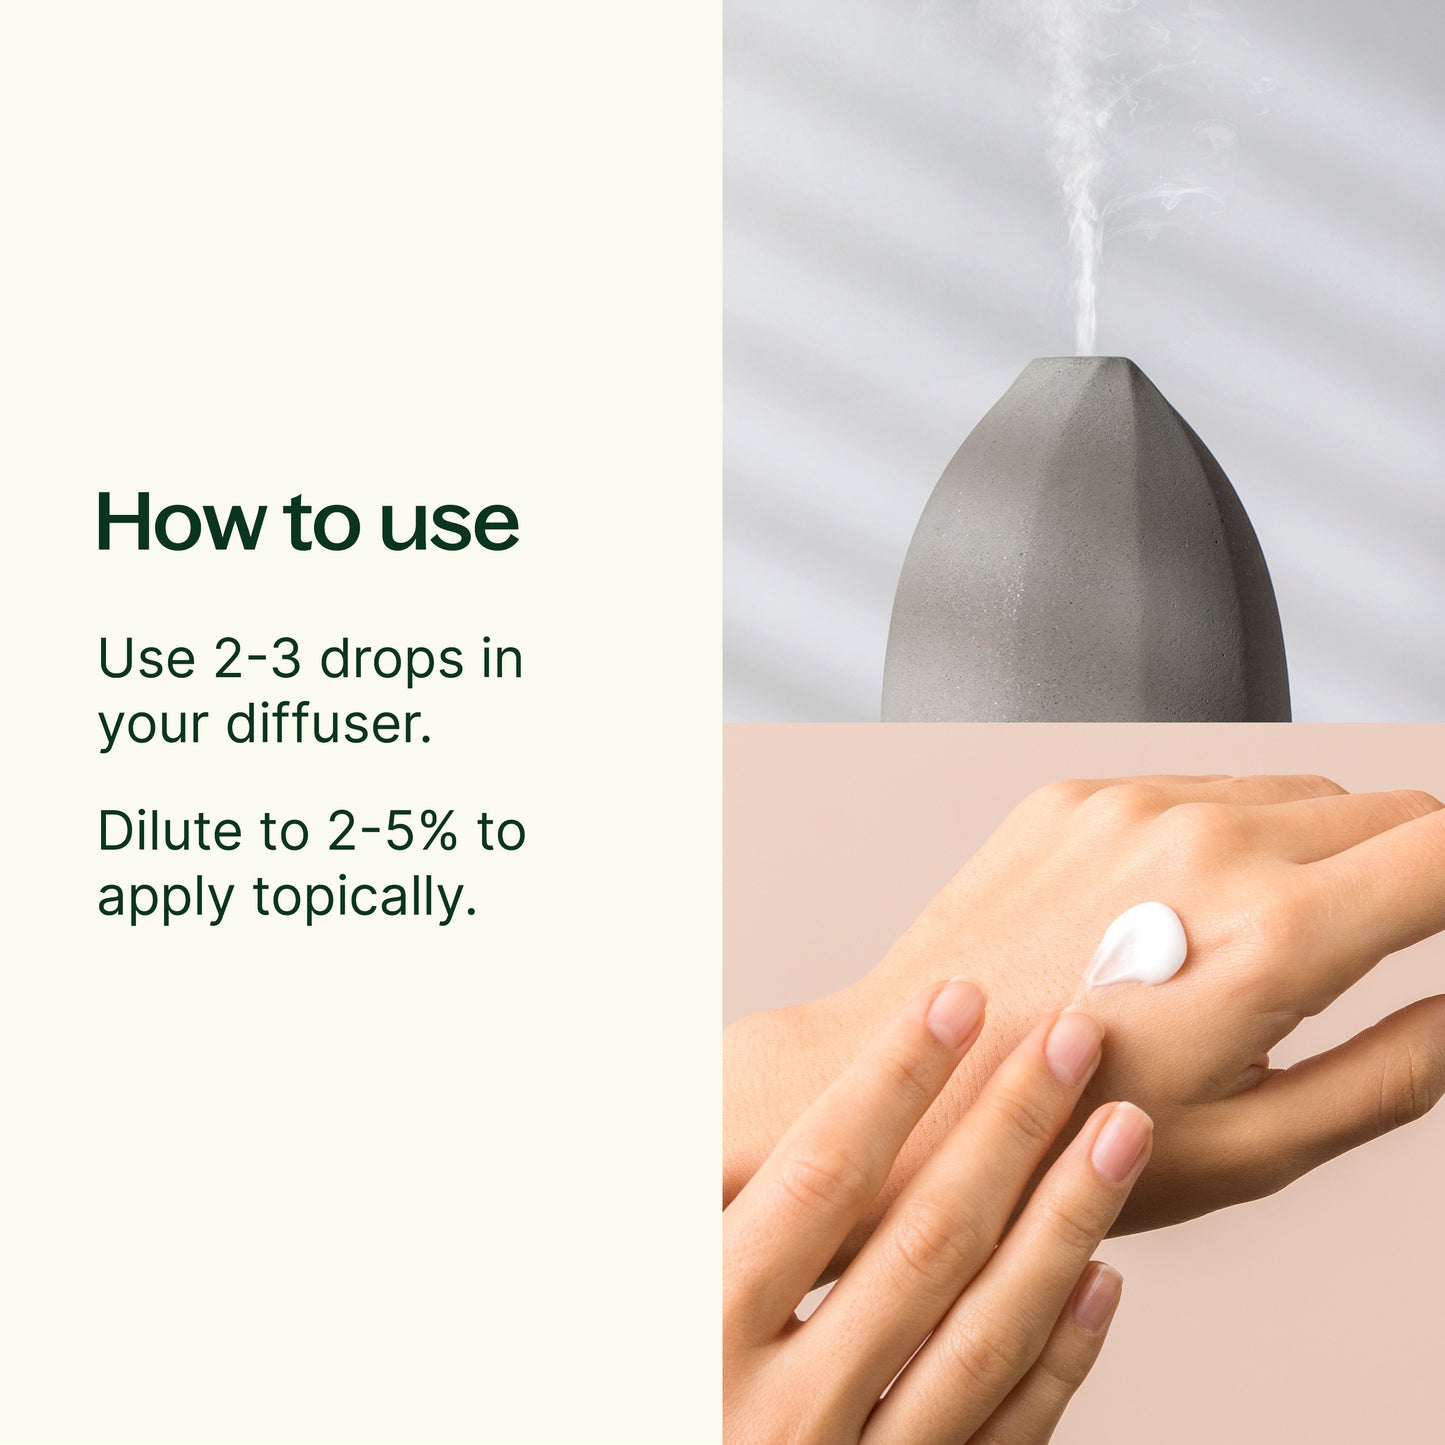 How to use Organic Eucalyptus Globulus Essential Oil: Use 2-3 drops in your diffuser. Dilute to 2-5% to apply topically.